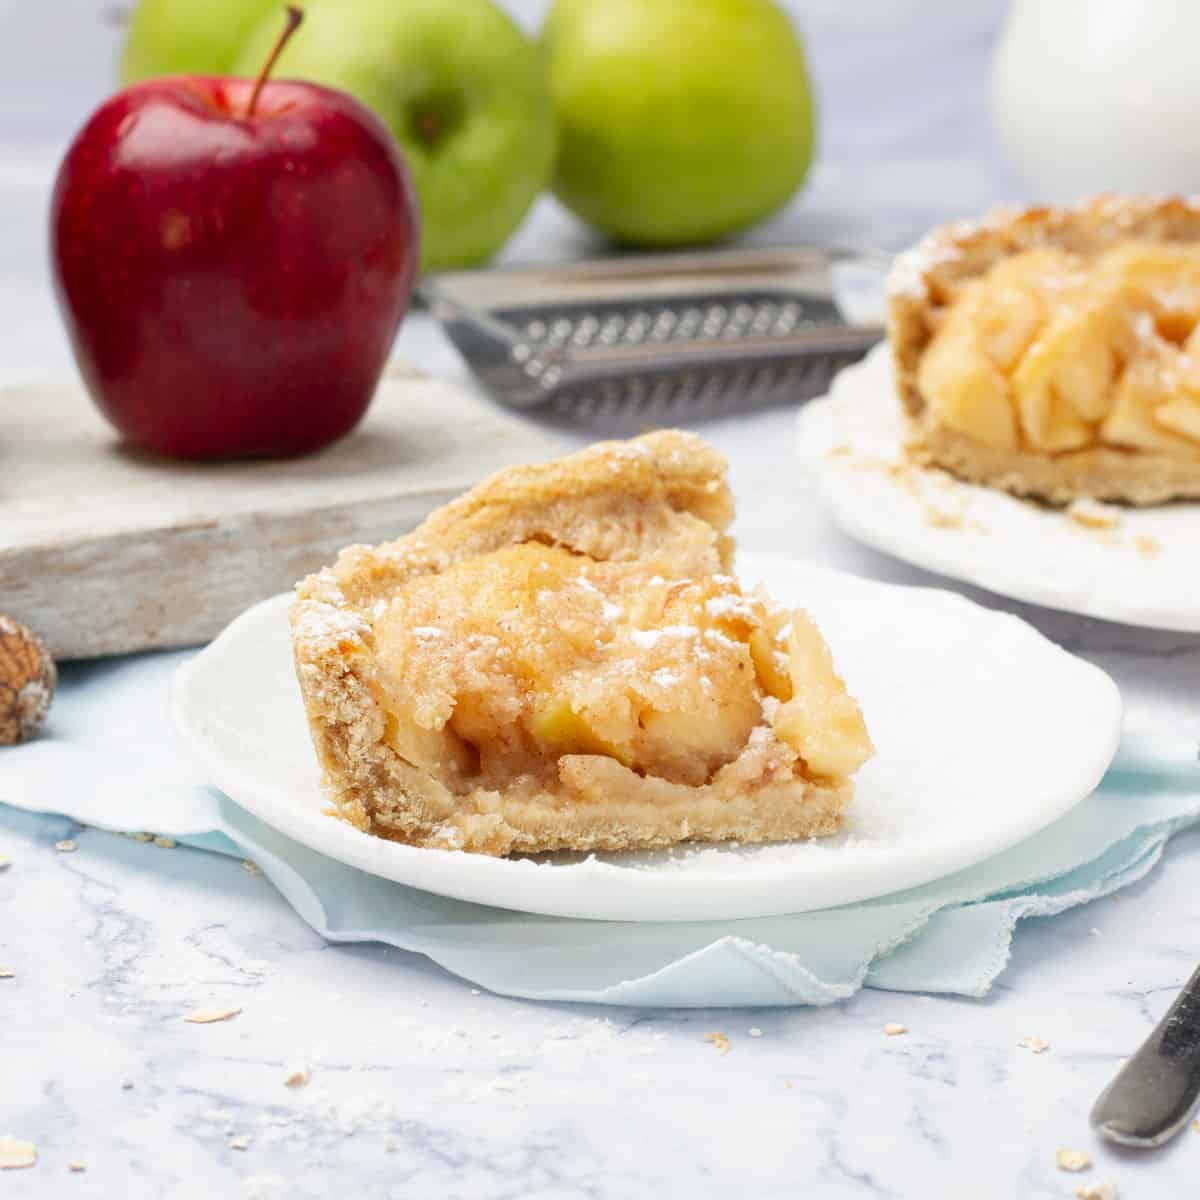 A slice of apple pie on a plate with a fork